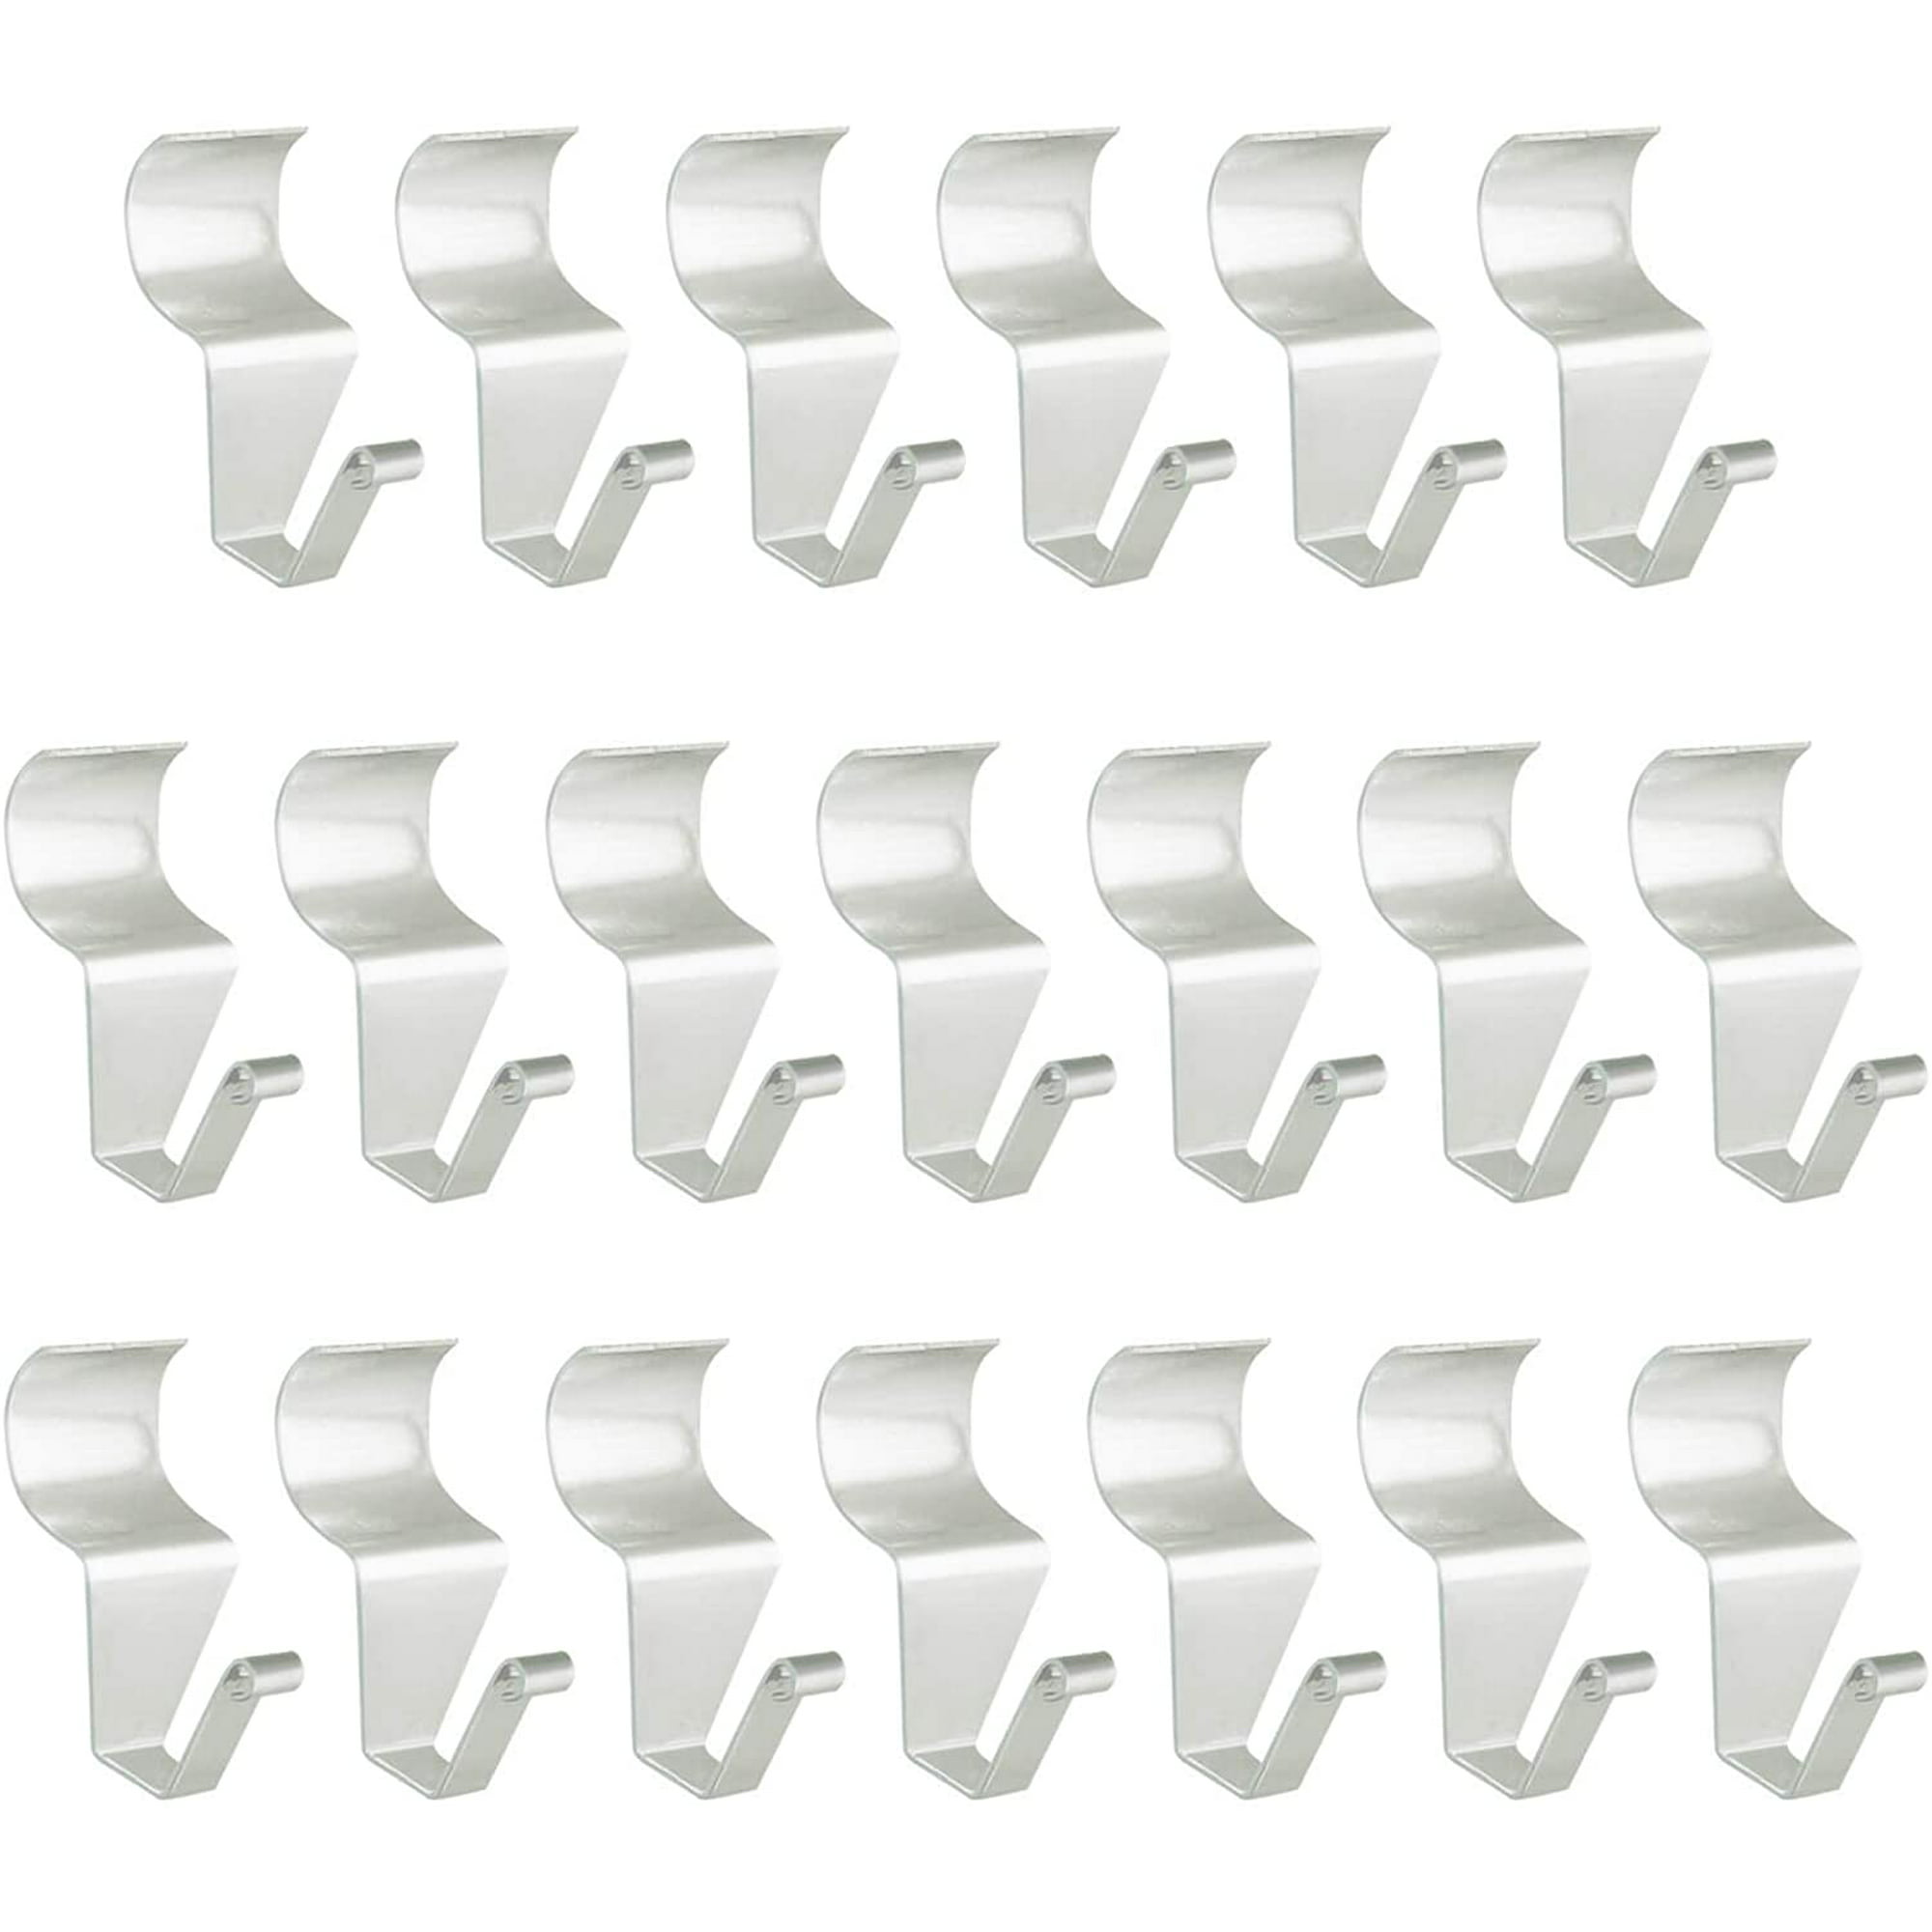 Vinyl Siding Hooks Hanger - 20 Pack Heavy Duty Stainless No-Hole Needed Vinyl Siding Clips for Hanging- Vinyl Siding Hooks for Outdoor Decorations (20) - image 1 of 7